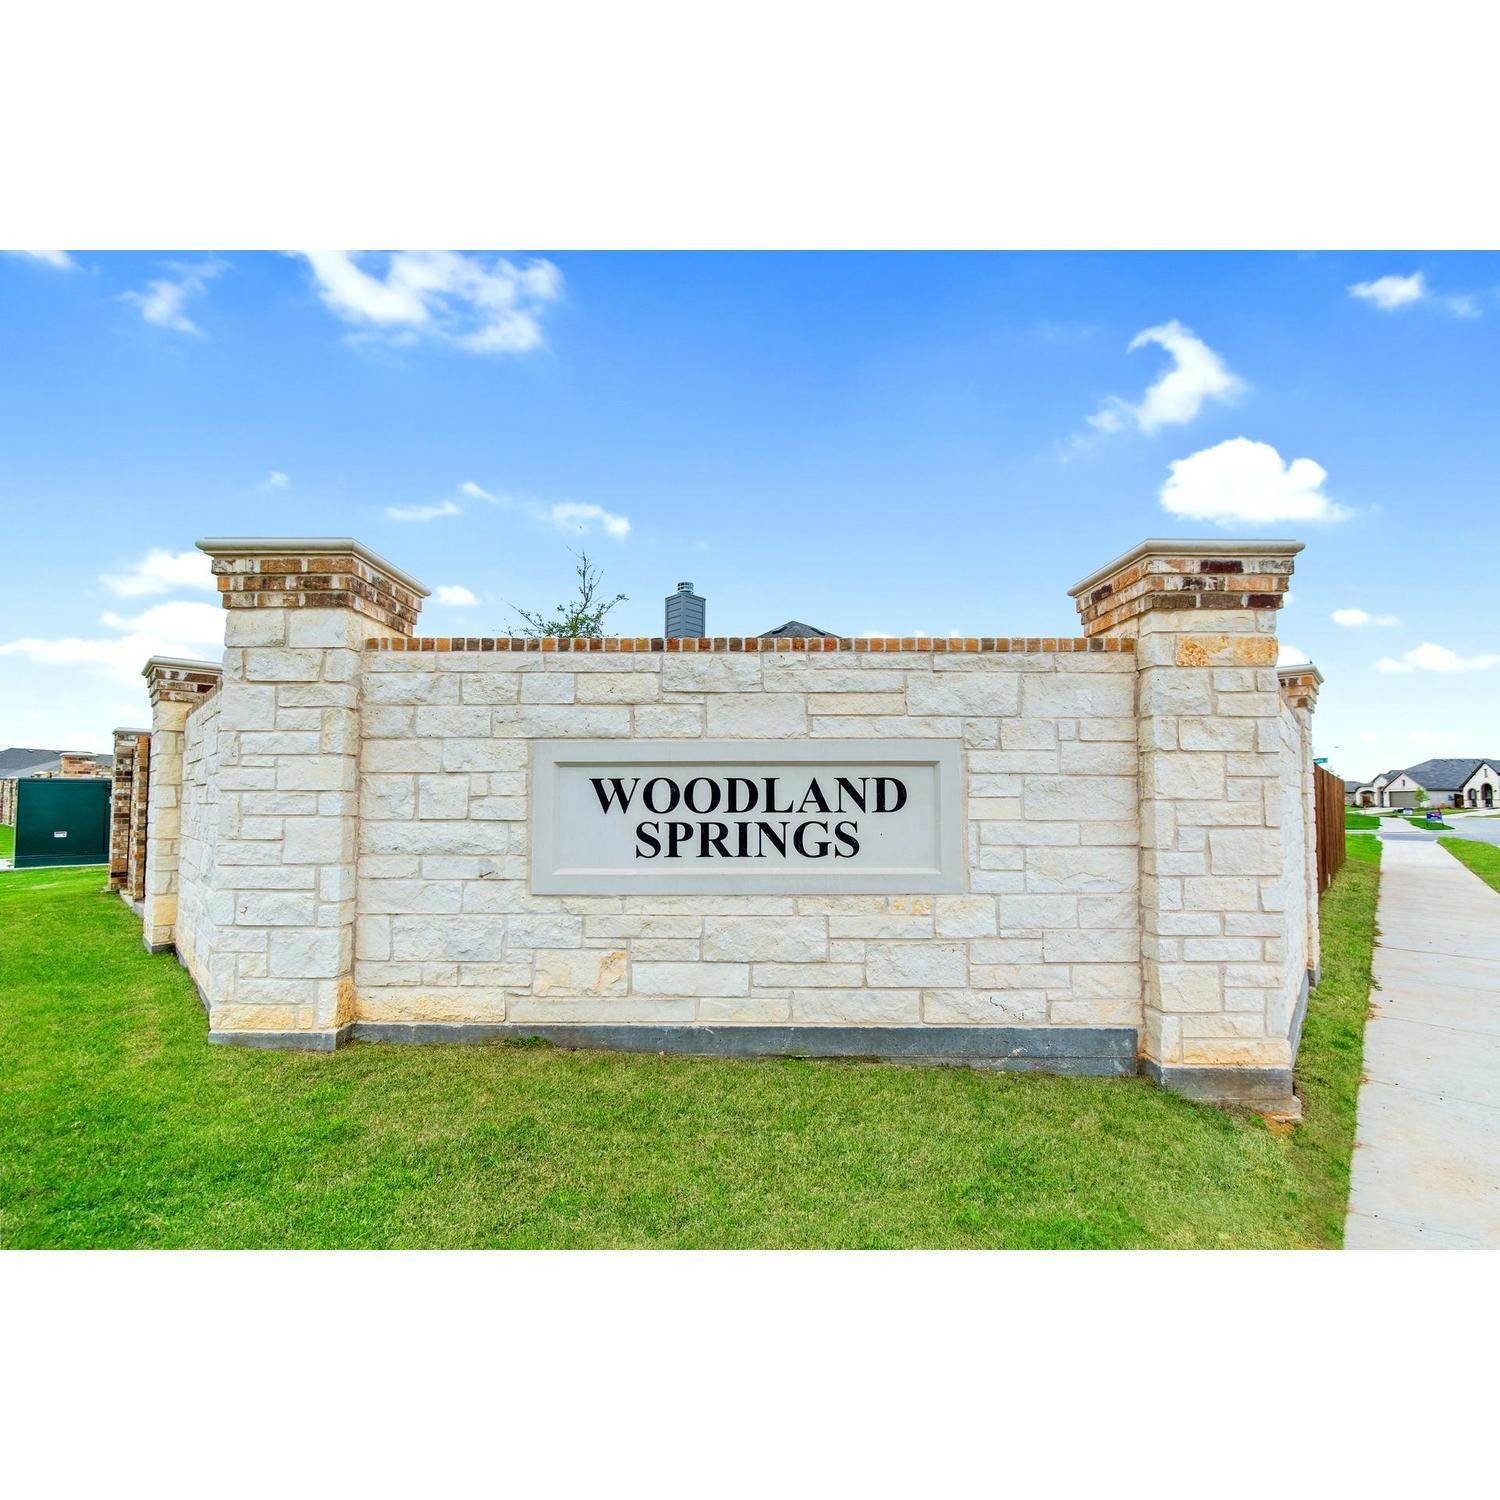 33. Woodland Springs xây dựng tại 4721 Sassafras Drive, Fort Worth, TX 76036